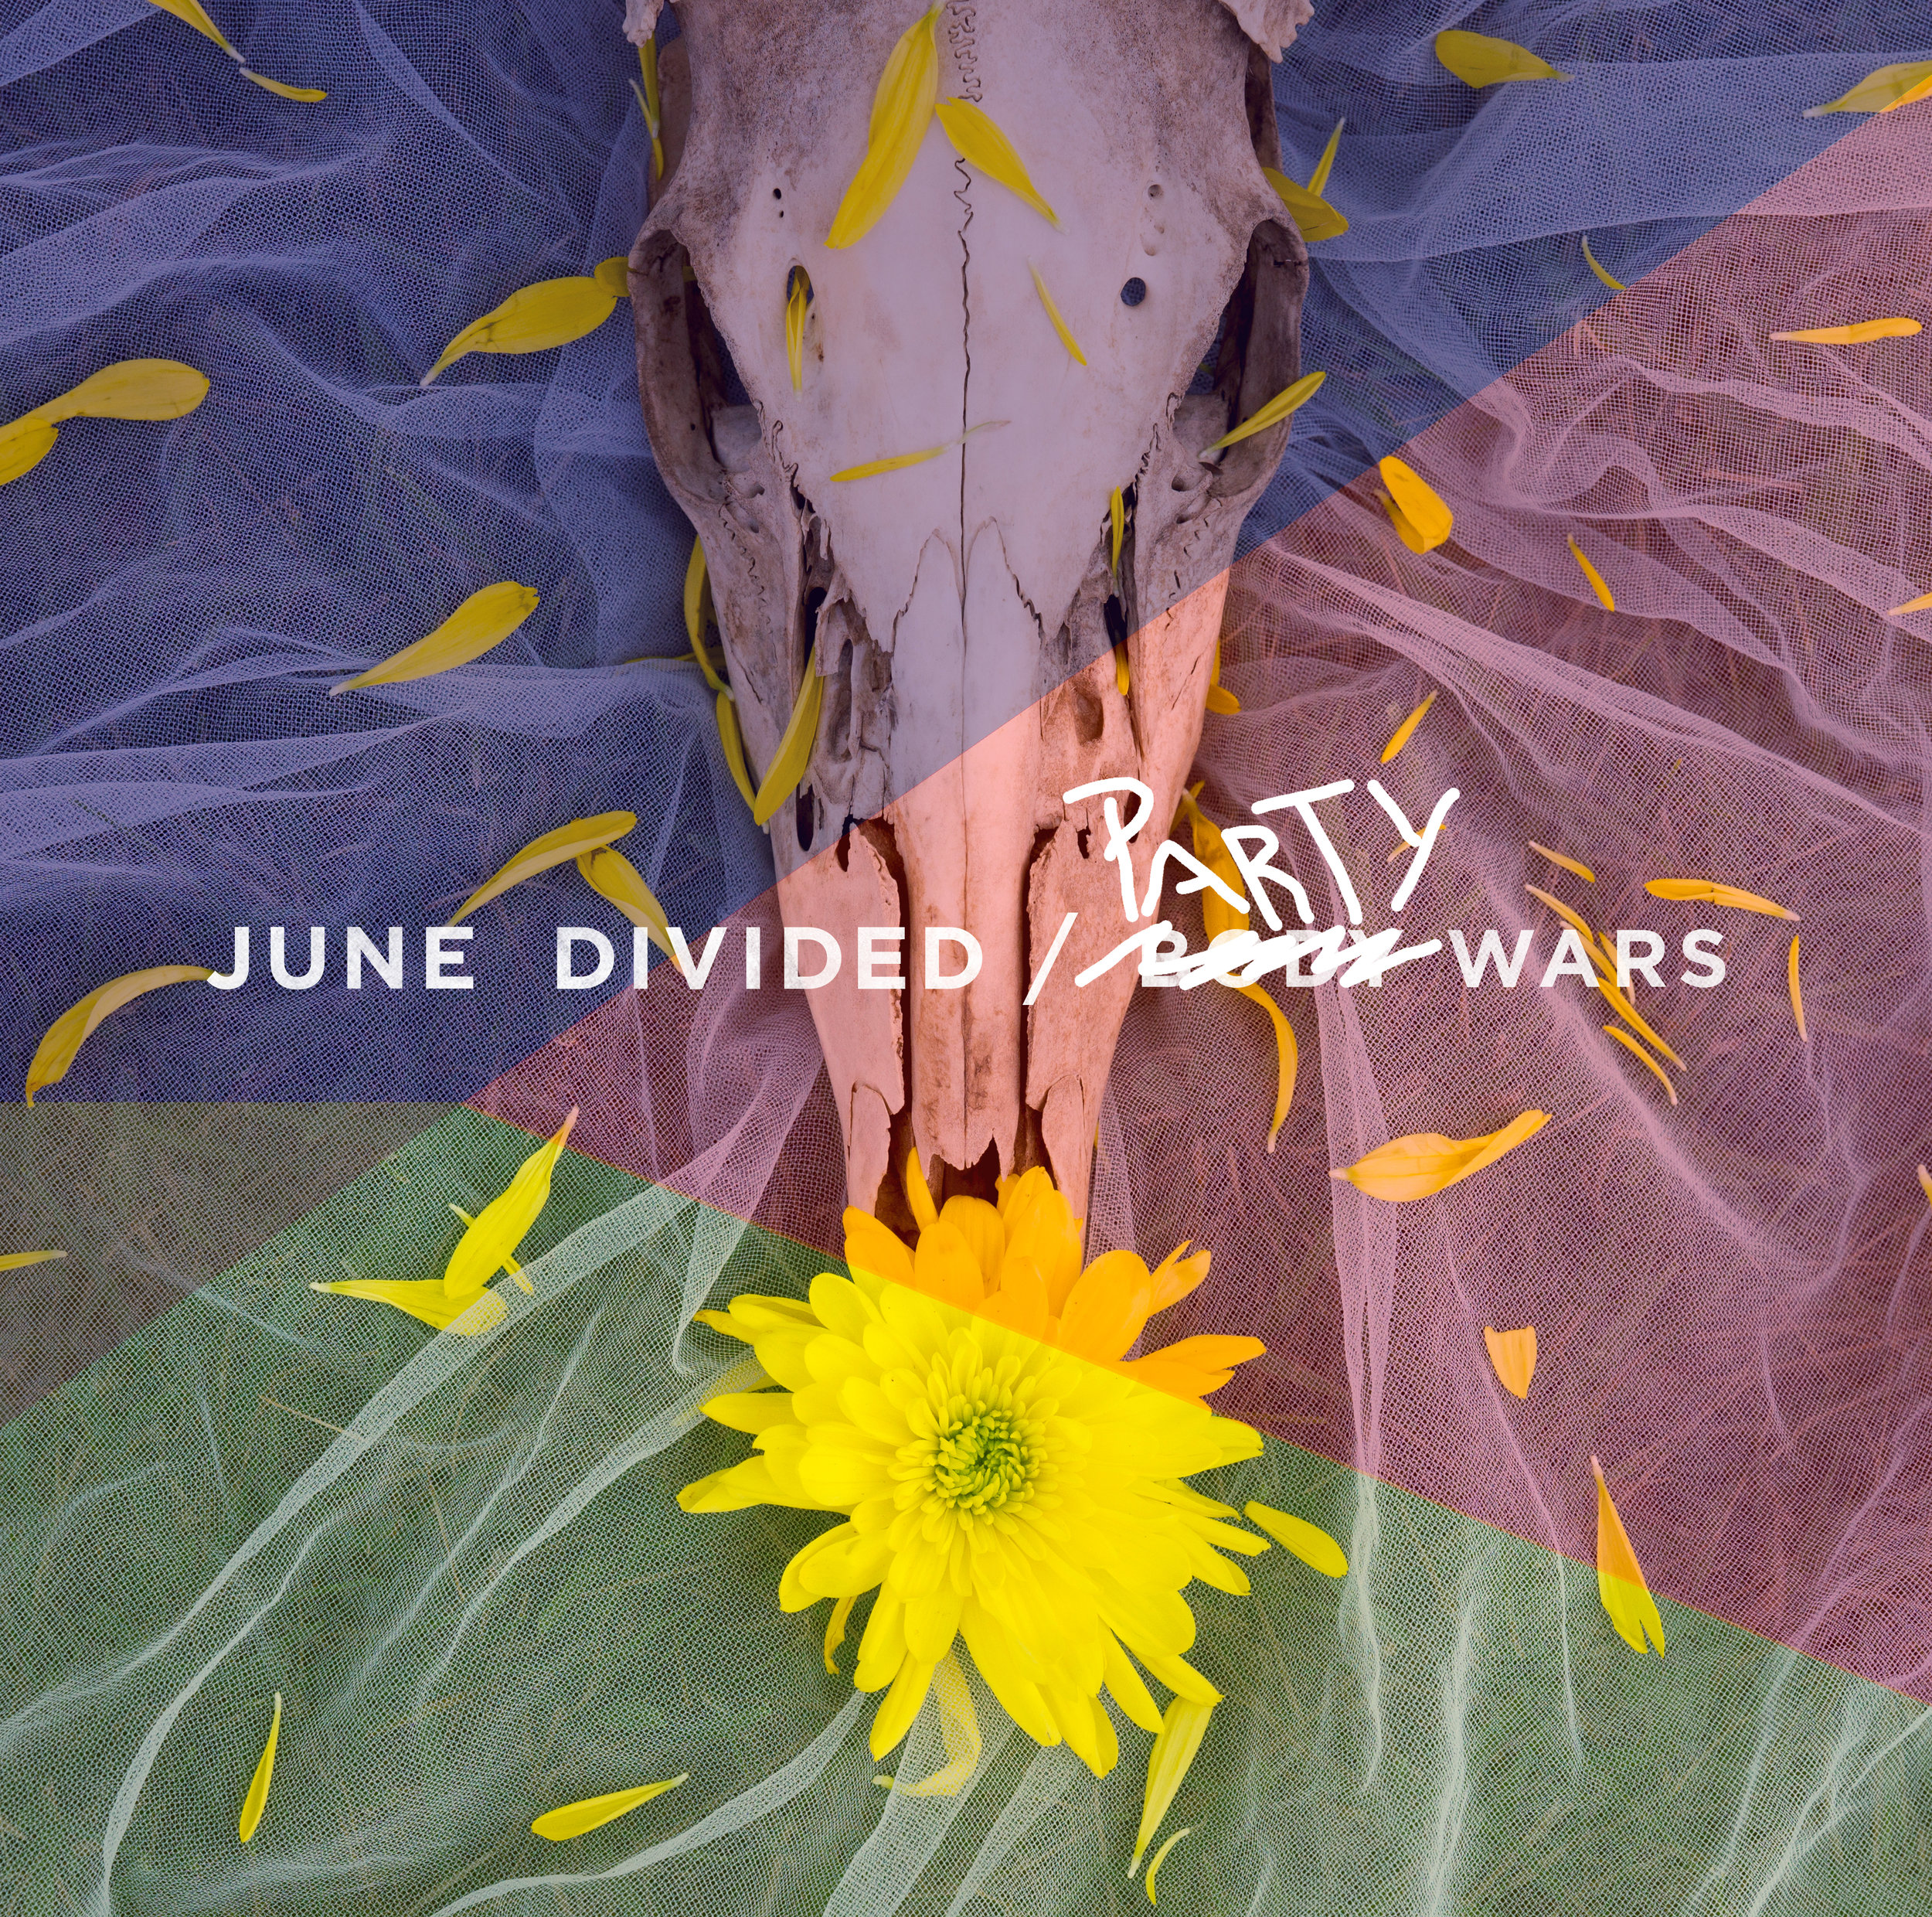 June Divided - "I Didn't Mind" (Party Wars Remix)